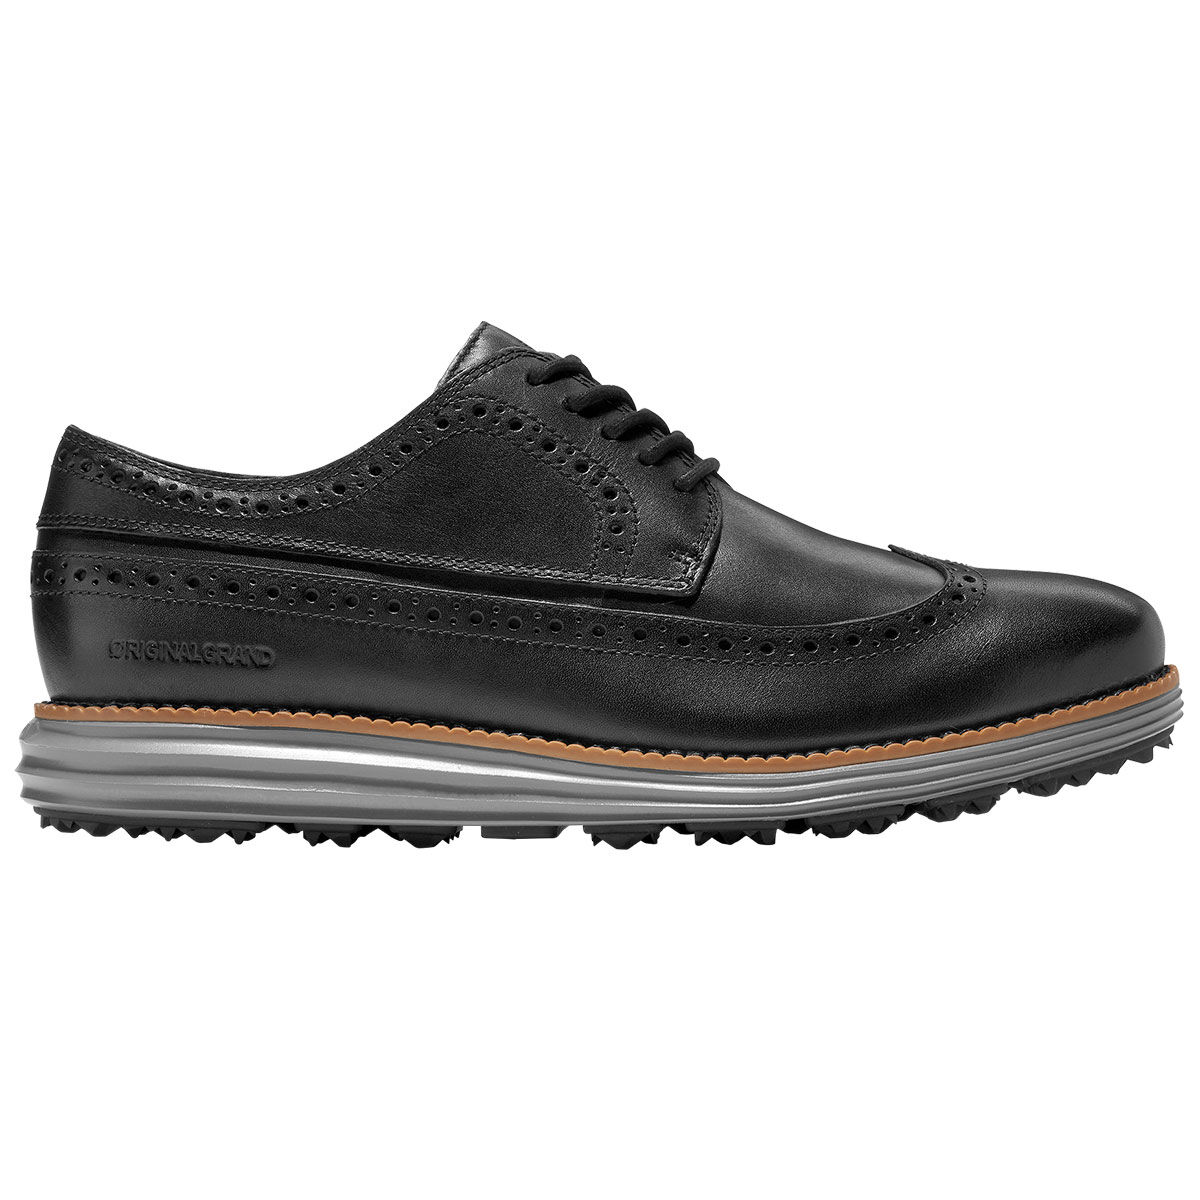 Cole Haan Men’s OG Longwing Oxford Spikeless Golf Shoes, Mens, Black/natural/quiet shade, 7 | American Golf